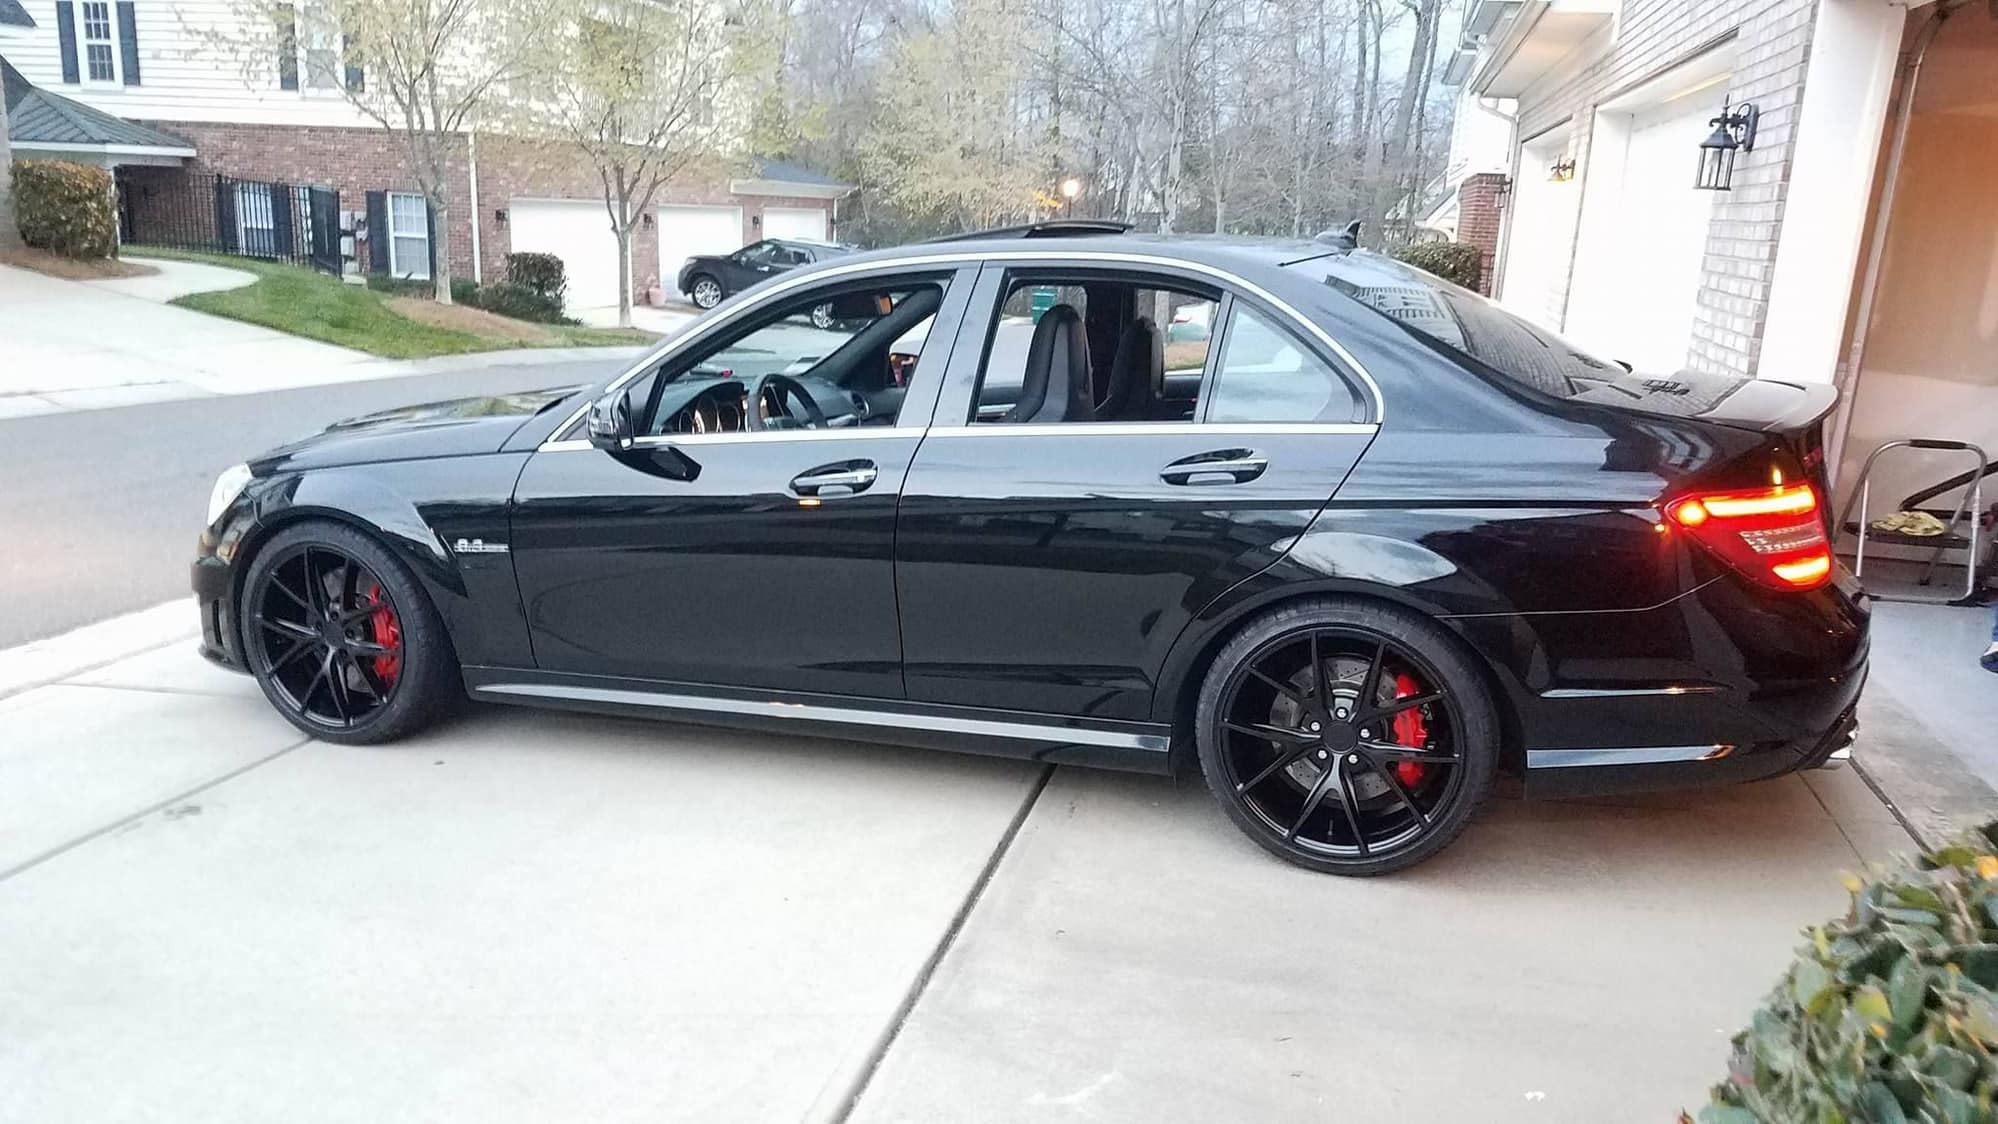 2013 Mercedes-Benz C63 AMG - 2013 C63 P31, 40k miles, meticulously serviced, good condition, loaded w/ options - Used - VIN WDDGF7HB8DA833904 - 40,000 Miles - 8 cyl - 2WD - Automatic - Sedan - Black - Charlotte, NC 29707, United States